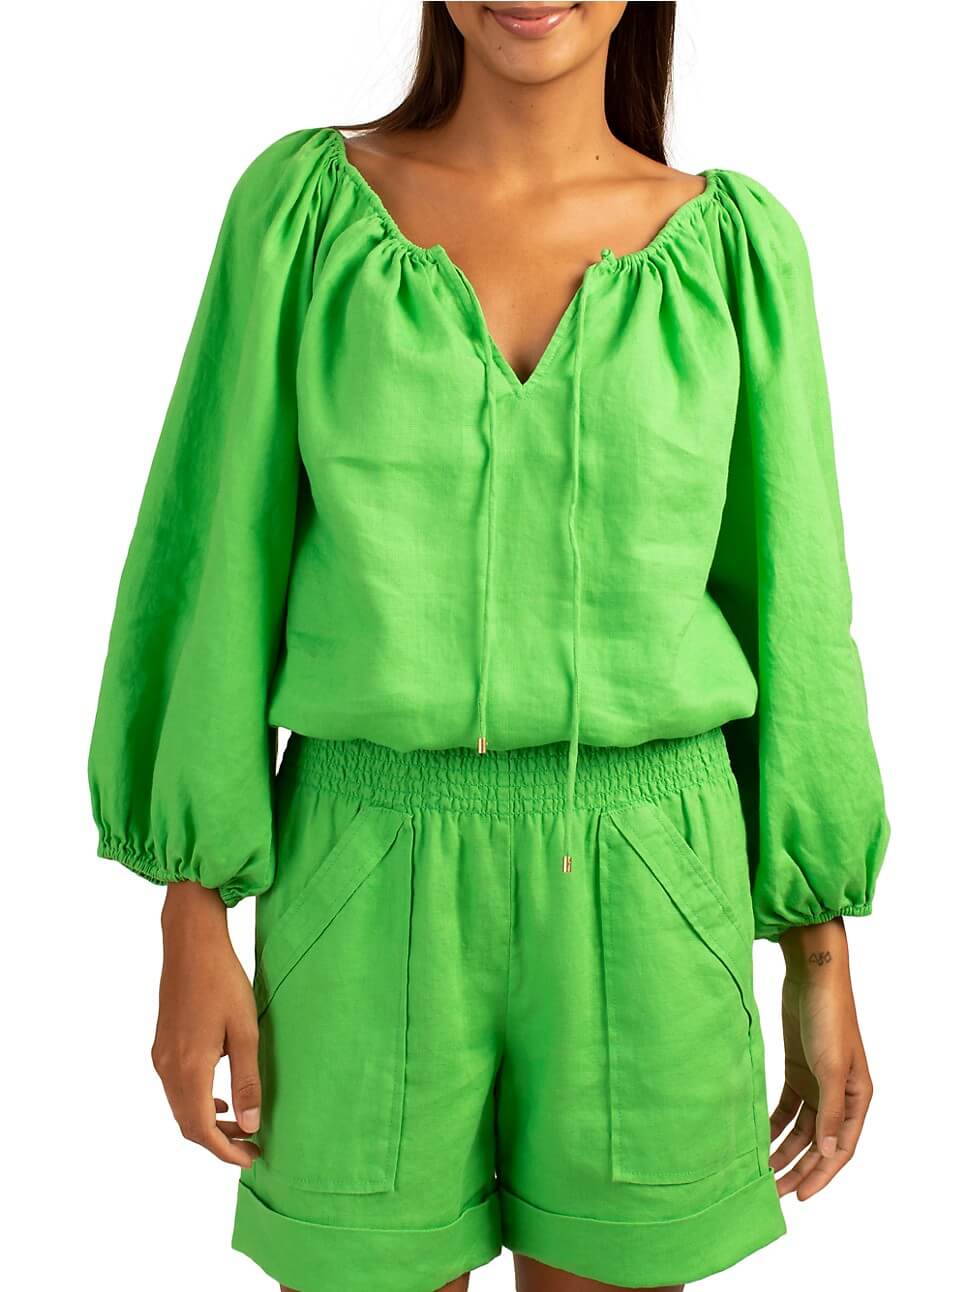 Model in balloon-sleeve green blouse and matching shorts.